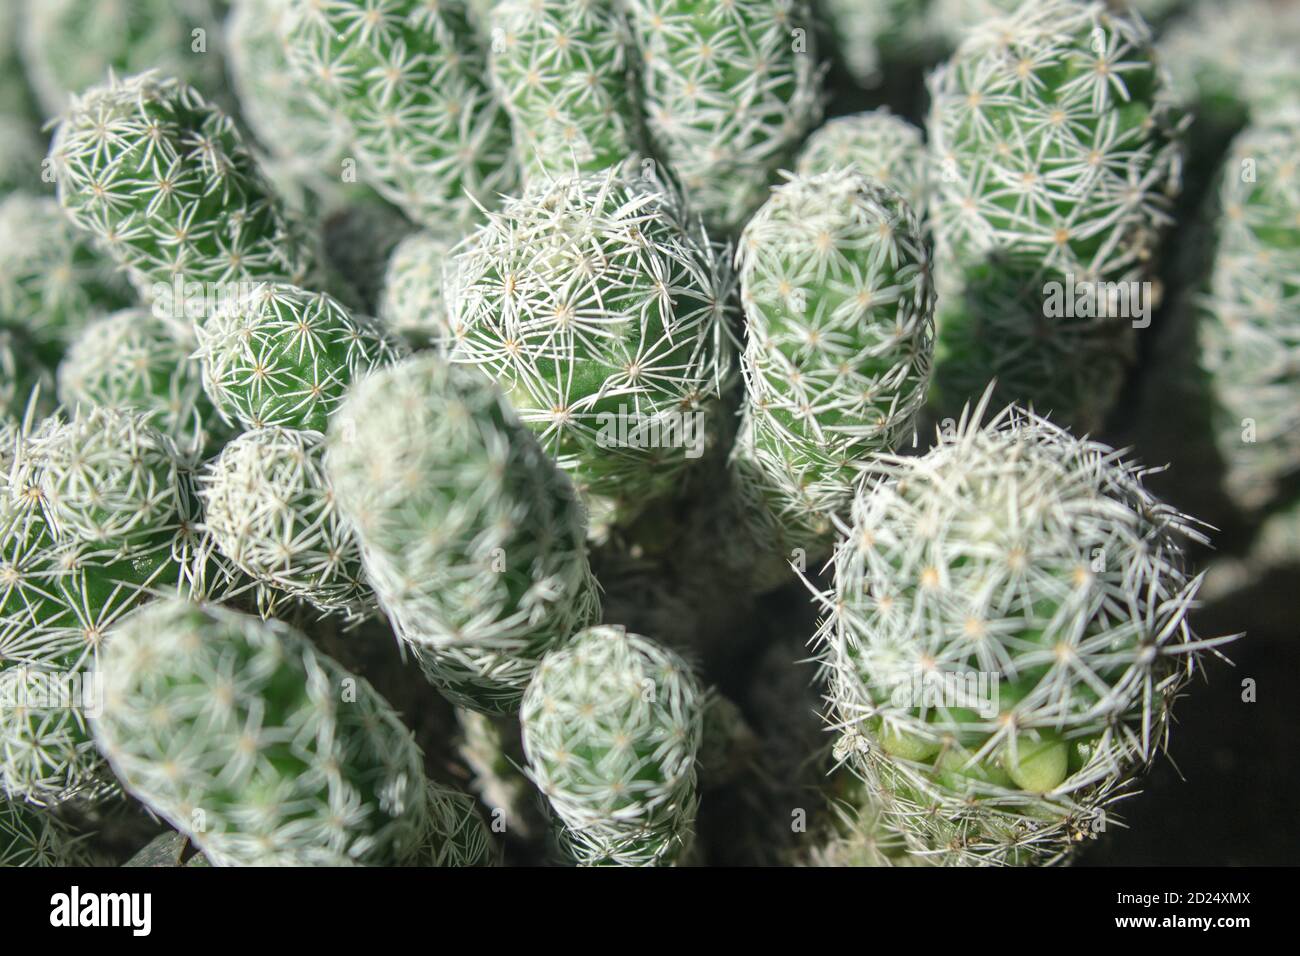 Detail of small succulent plant without flowers. Small rebutia with delicate white thorns Stock Photo